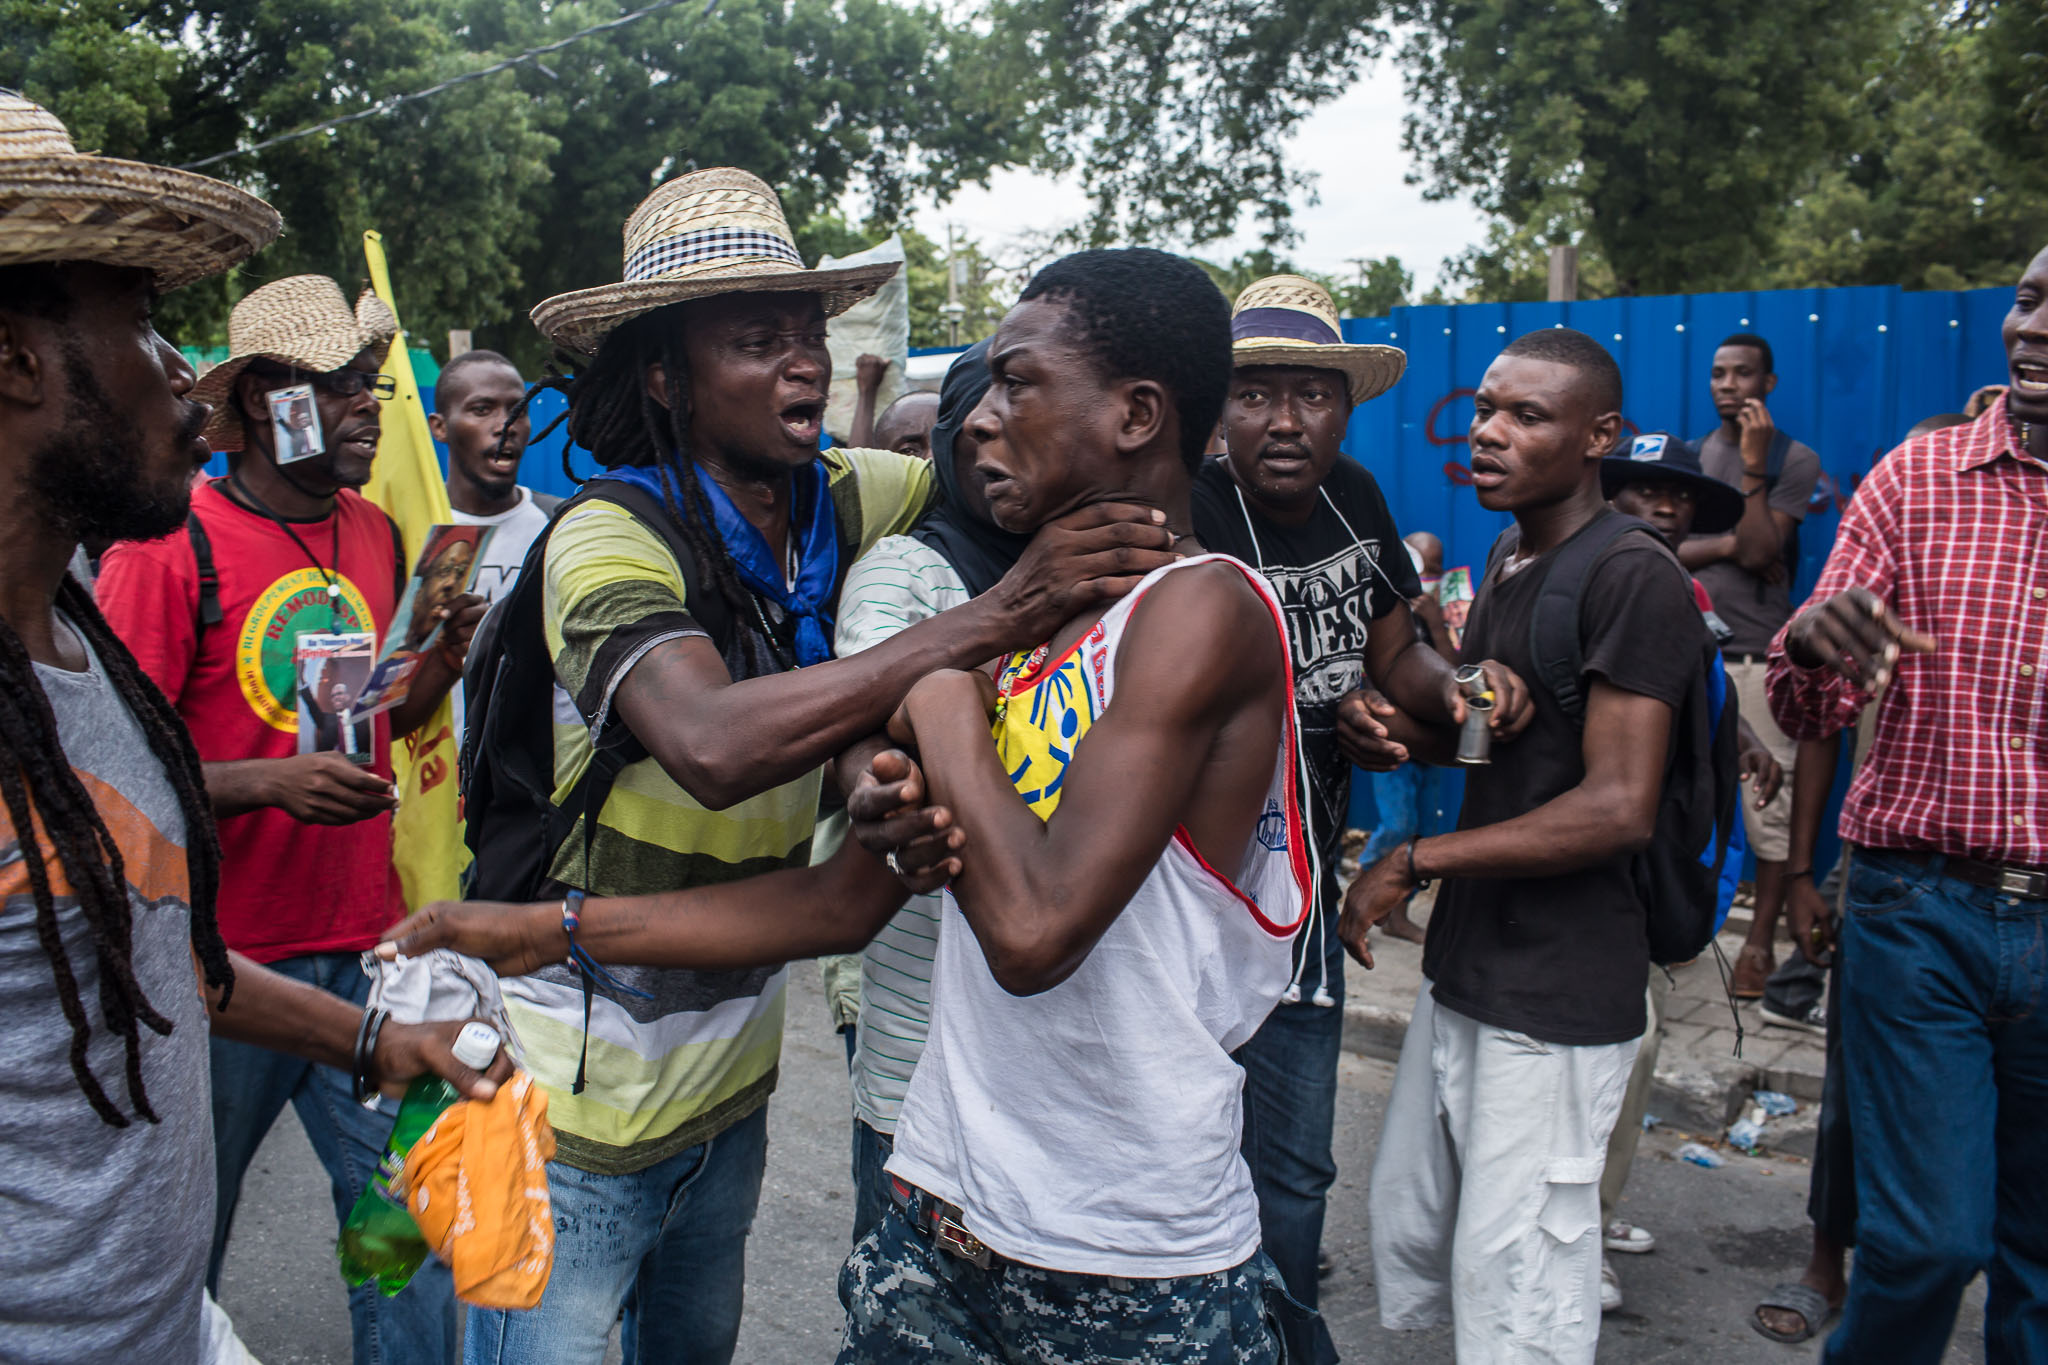  Anti-government protesters confront a pro-government man accused of stealing a cell phone on Tuesday, December 16, 2014 in Port-au-Prince, Haiti. President Michel Martelly was elected in 2010 with great hope for reforms, but in the wake of slow reco